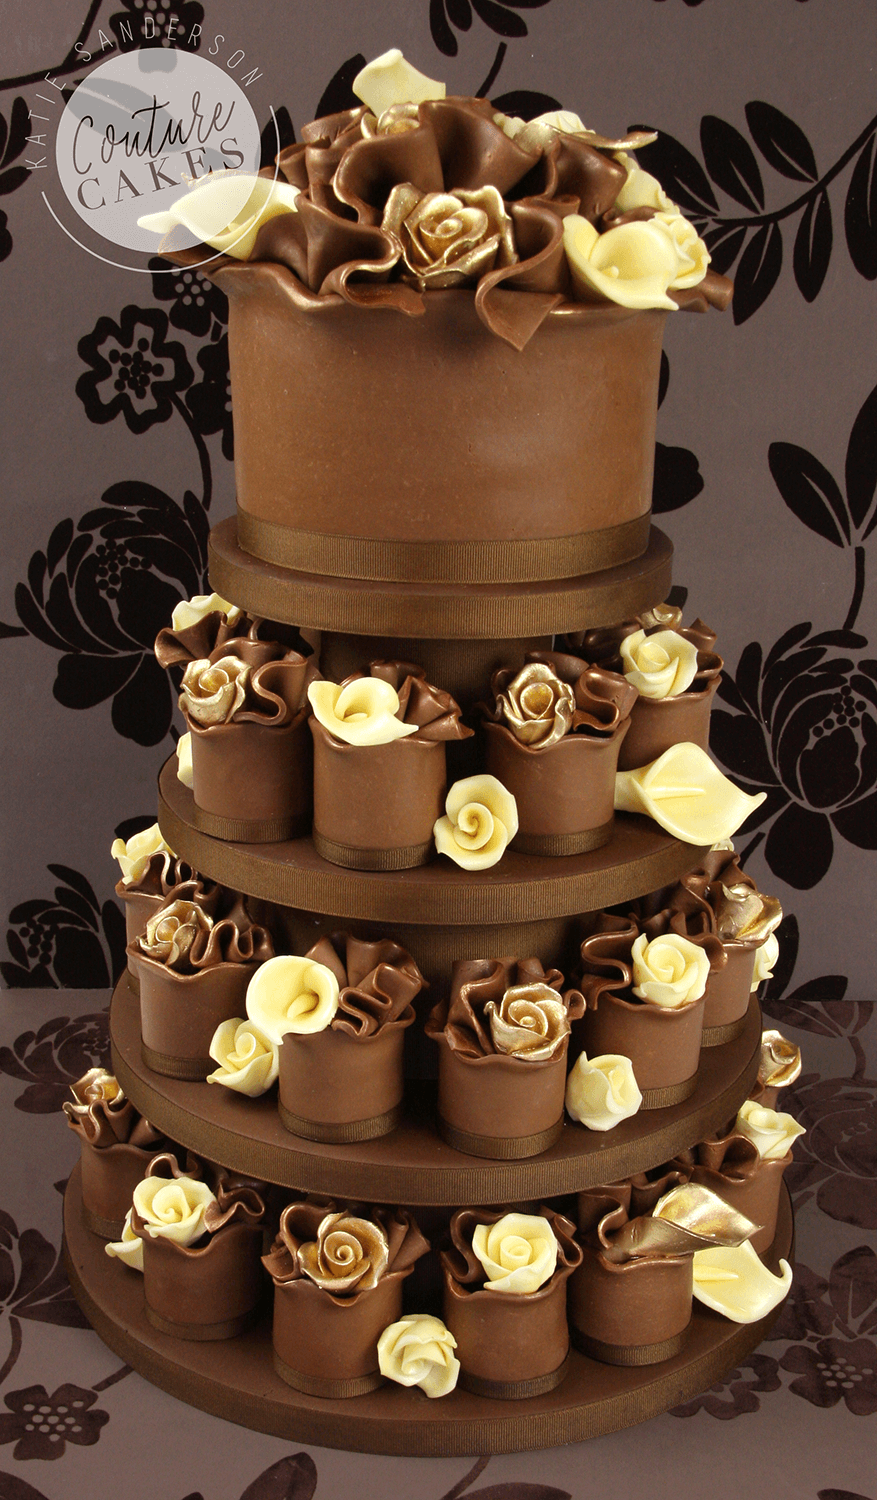 Serves 30 mini cakes & 20 portion top tier, Price as pictured £404 